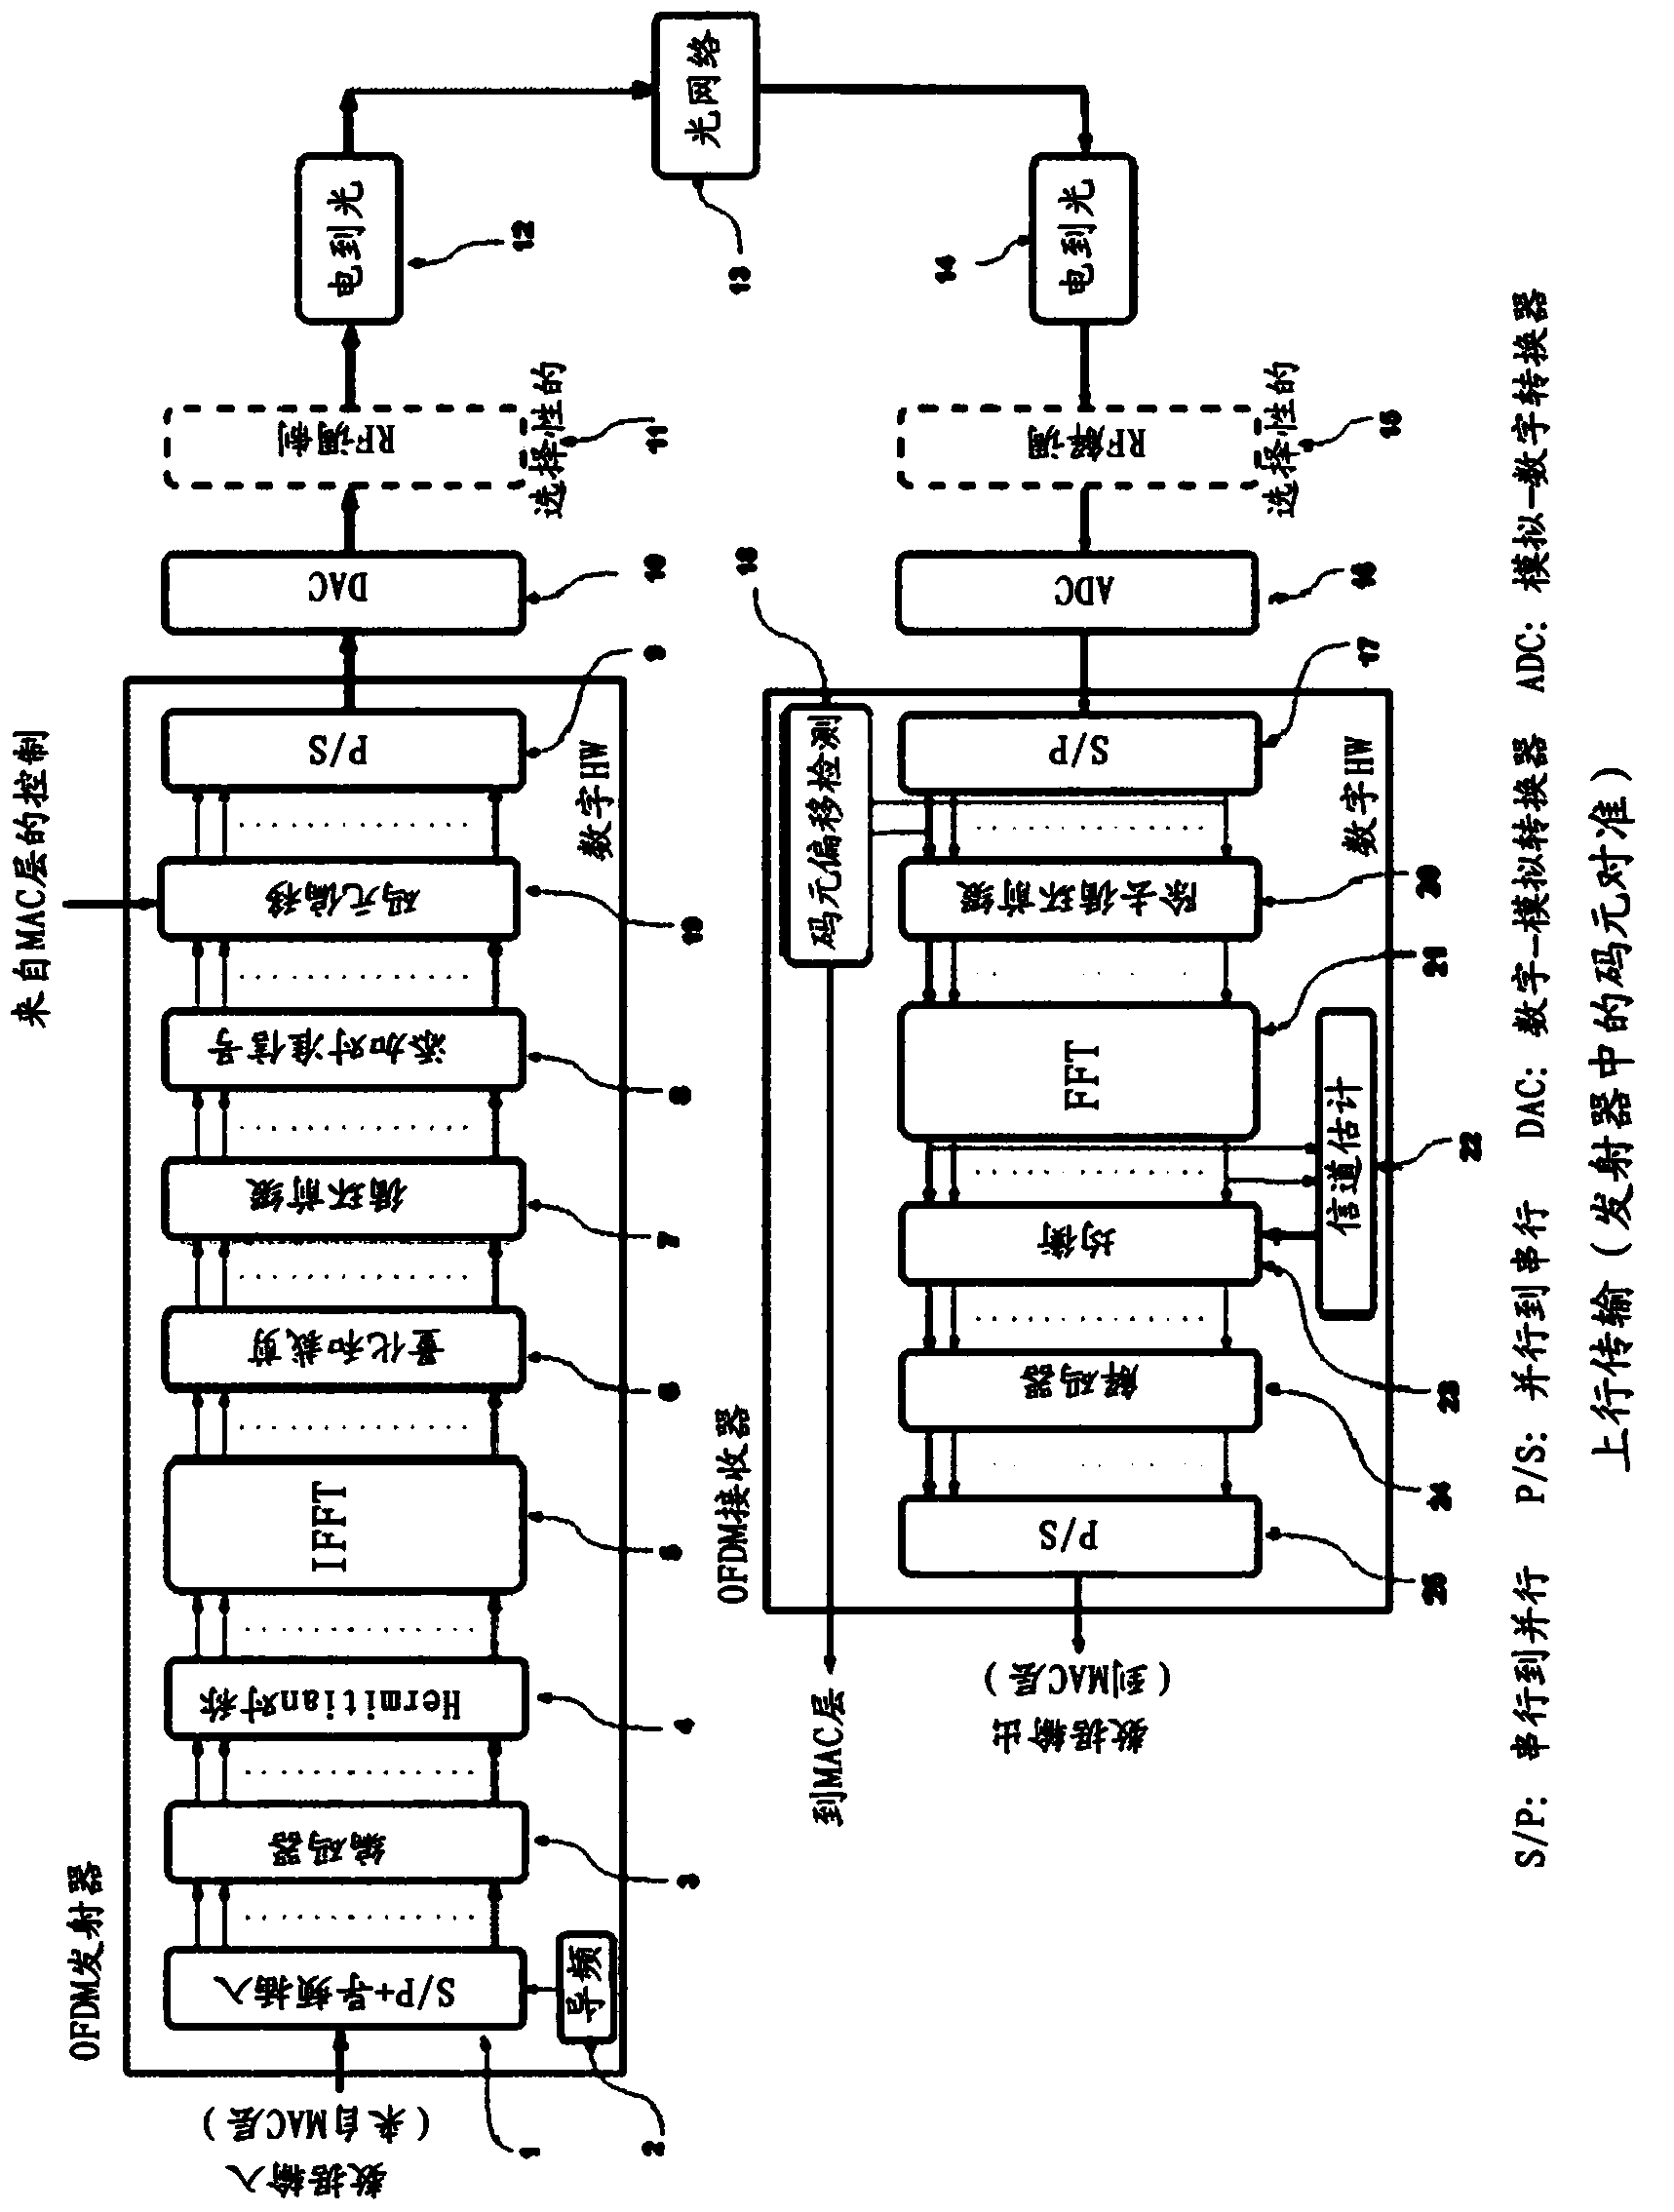 Symbol alignment in high speed optical orthogonal frequency division multiplexing transmission systems